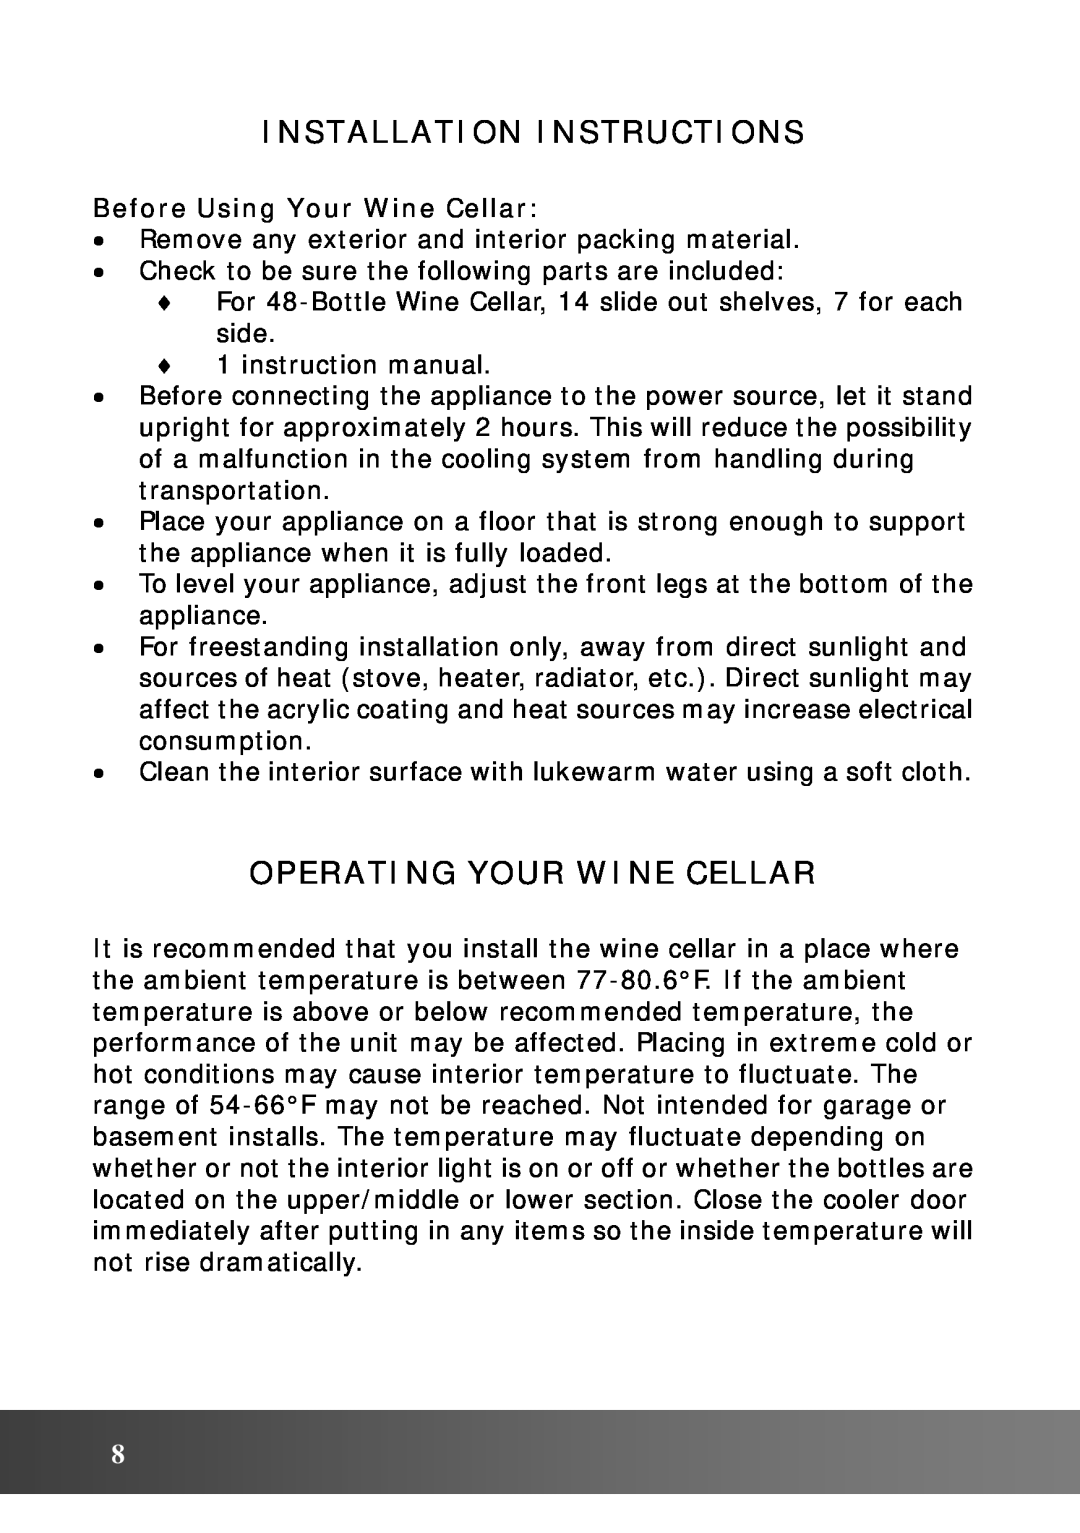 Vinotemp VT48TEDS2Z owner manual Installation Instructions, Operating Your Wine Cellar, Before Using Your Wine Cellar 